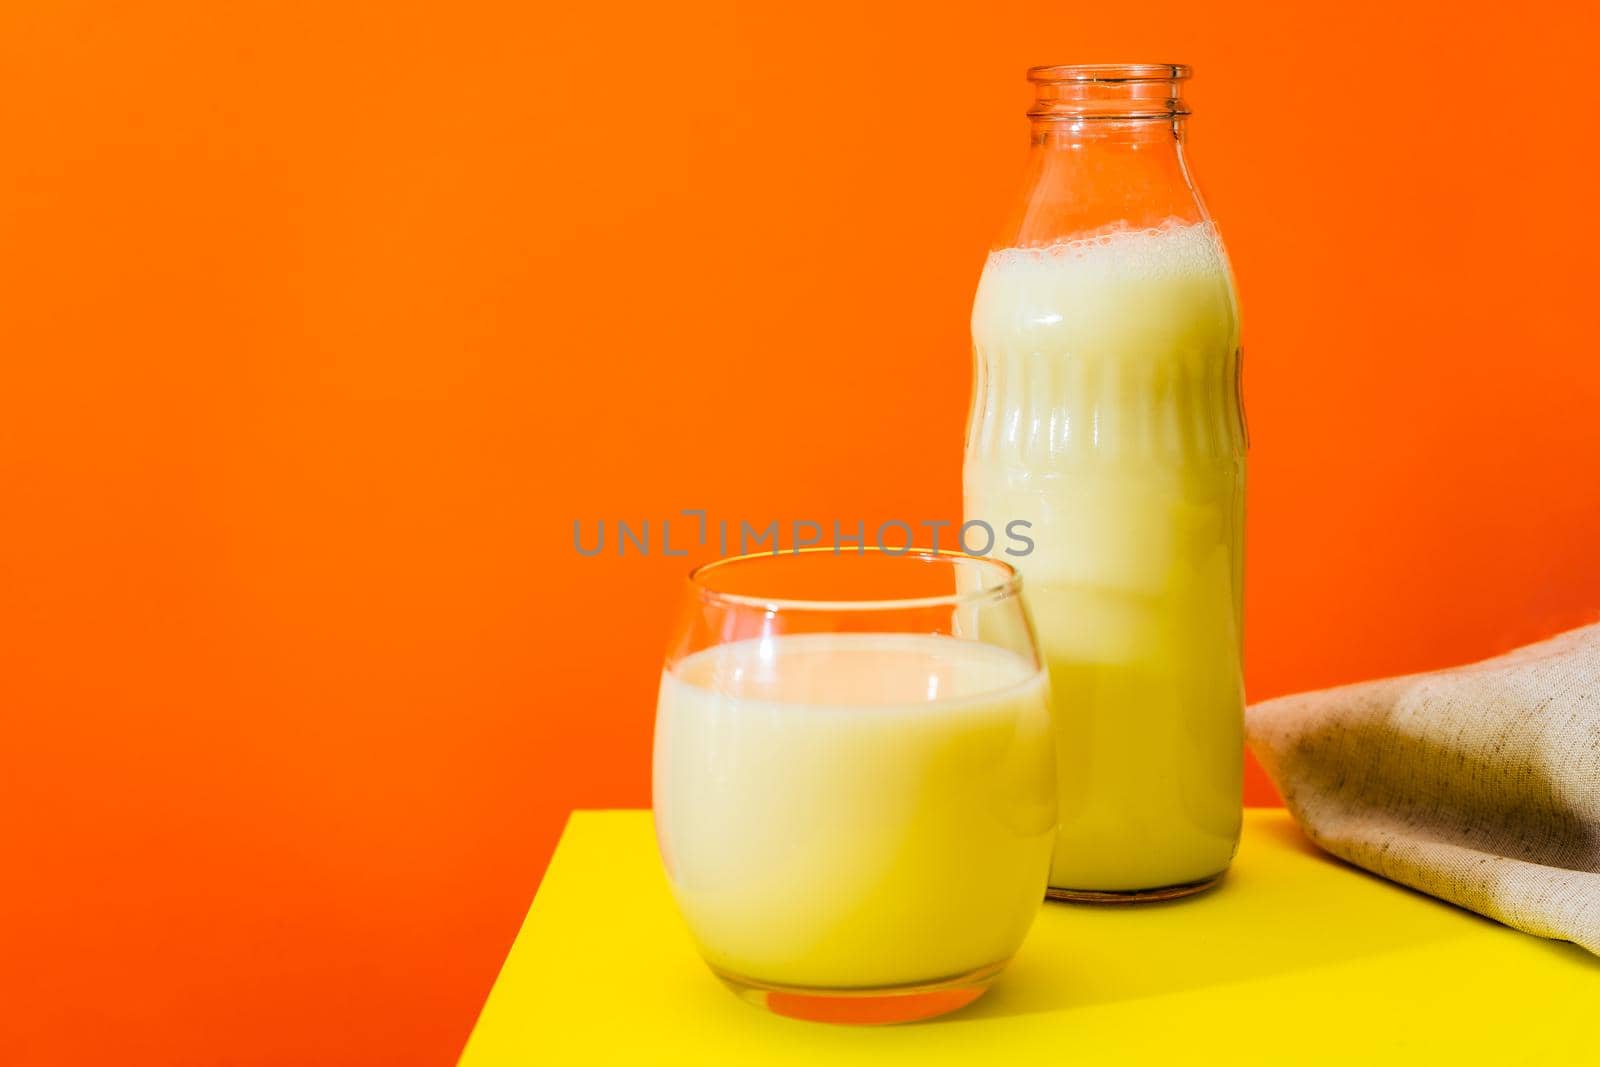 Glass bottle and large glass with milk on a yellow table with orange background. Copy space.